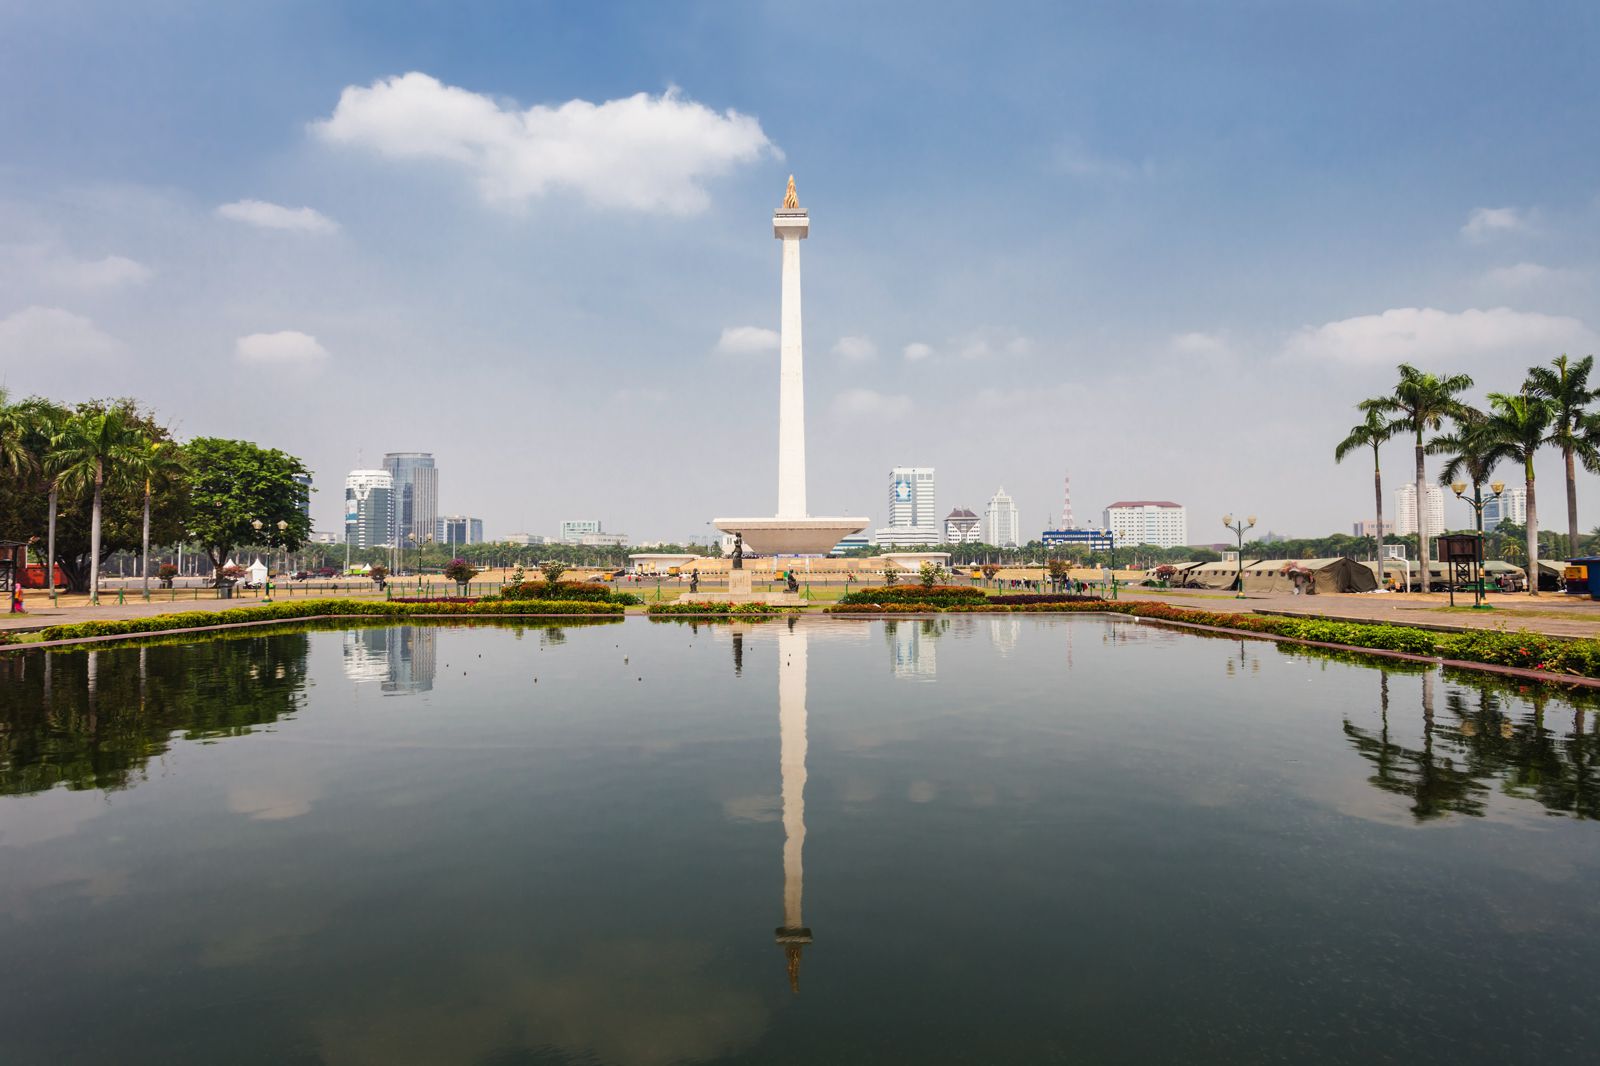 10 Places You Have To Visit In Jakarta, Indonesia - Hand Luggage Only